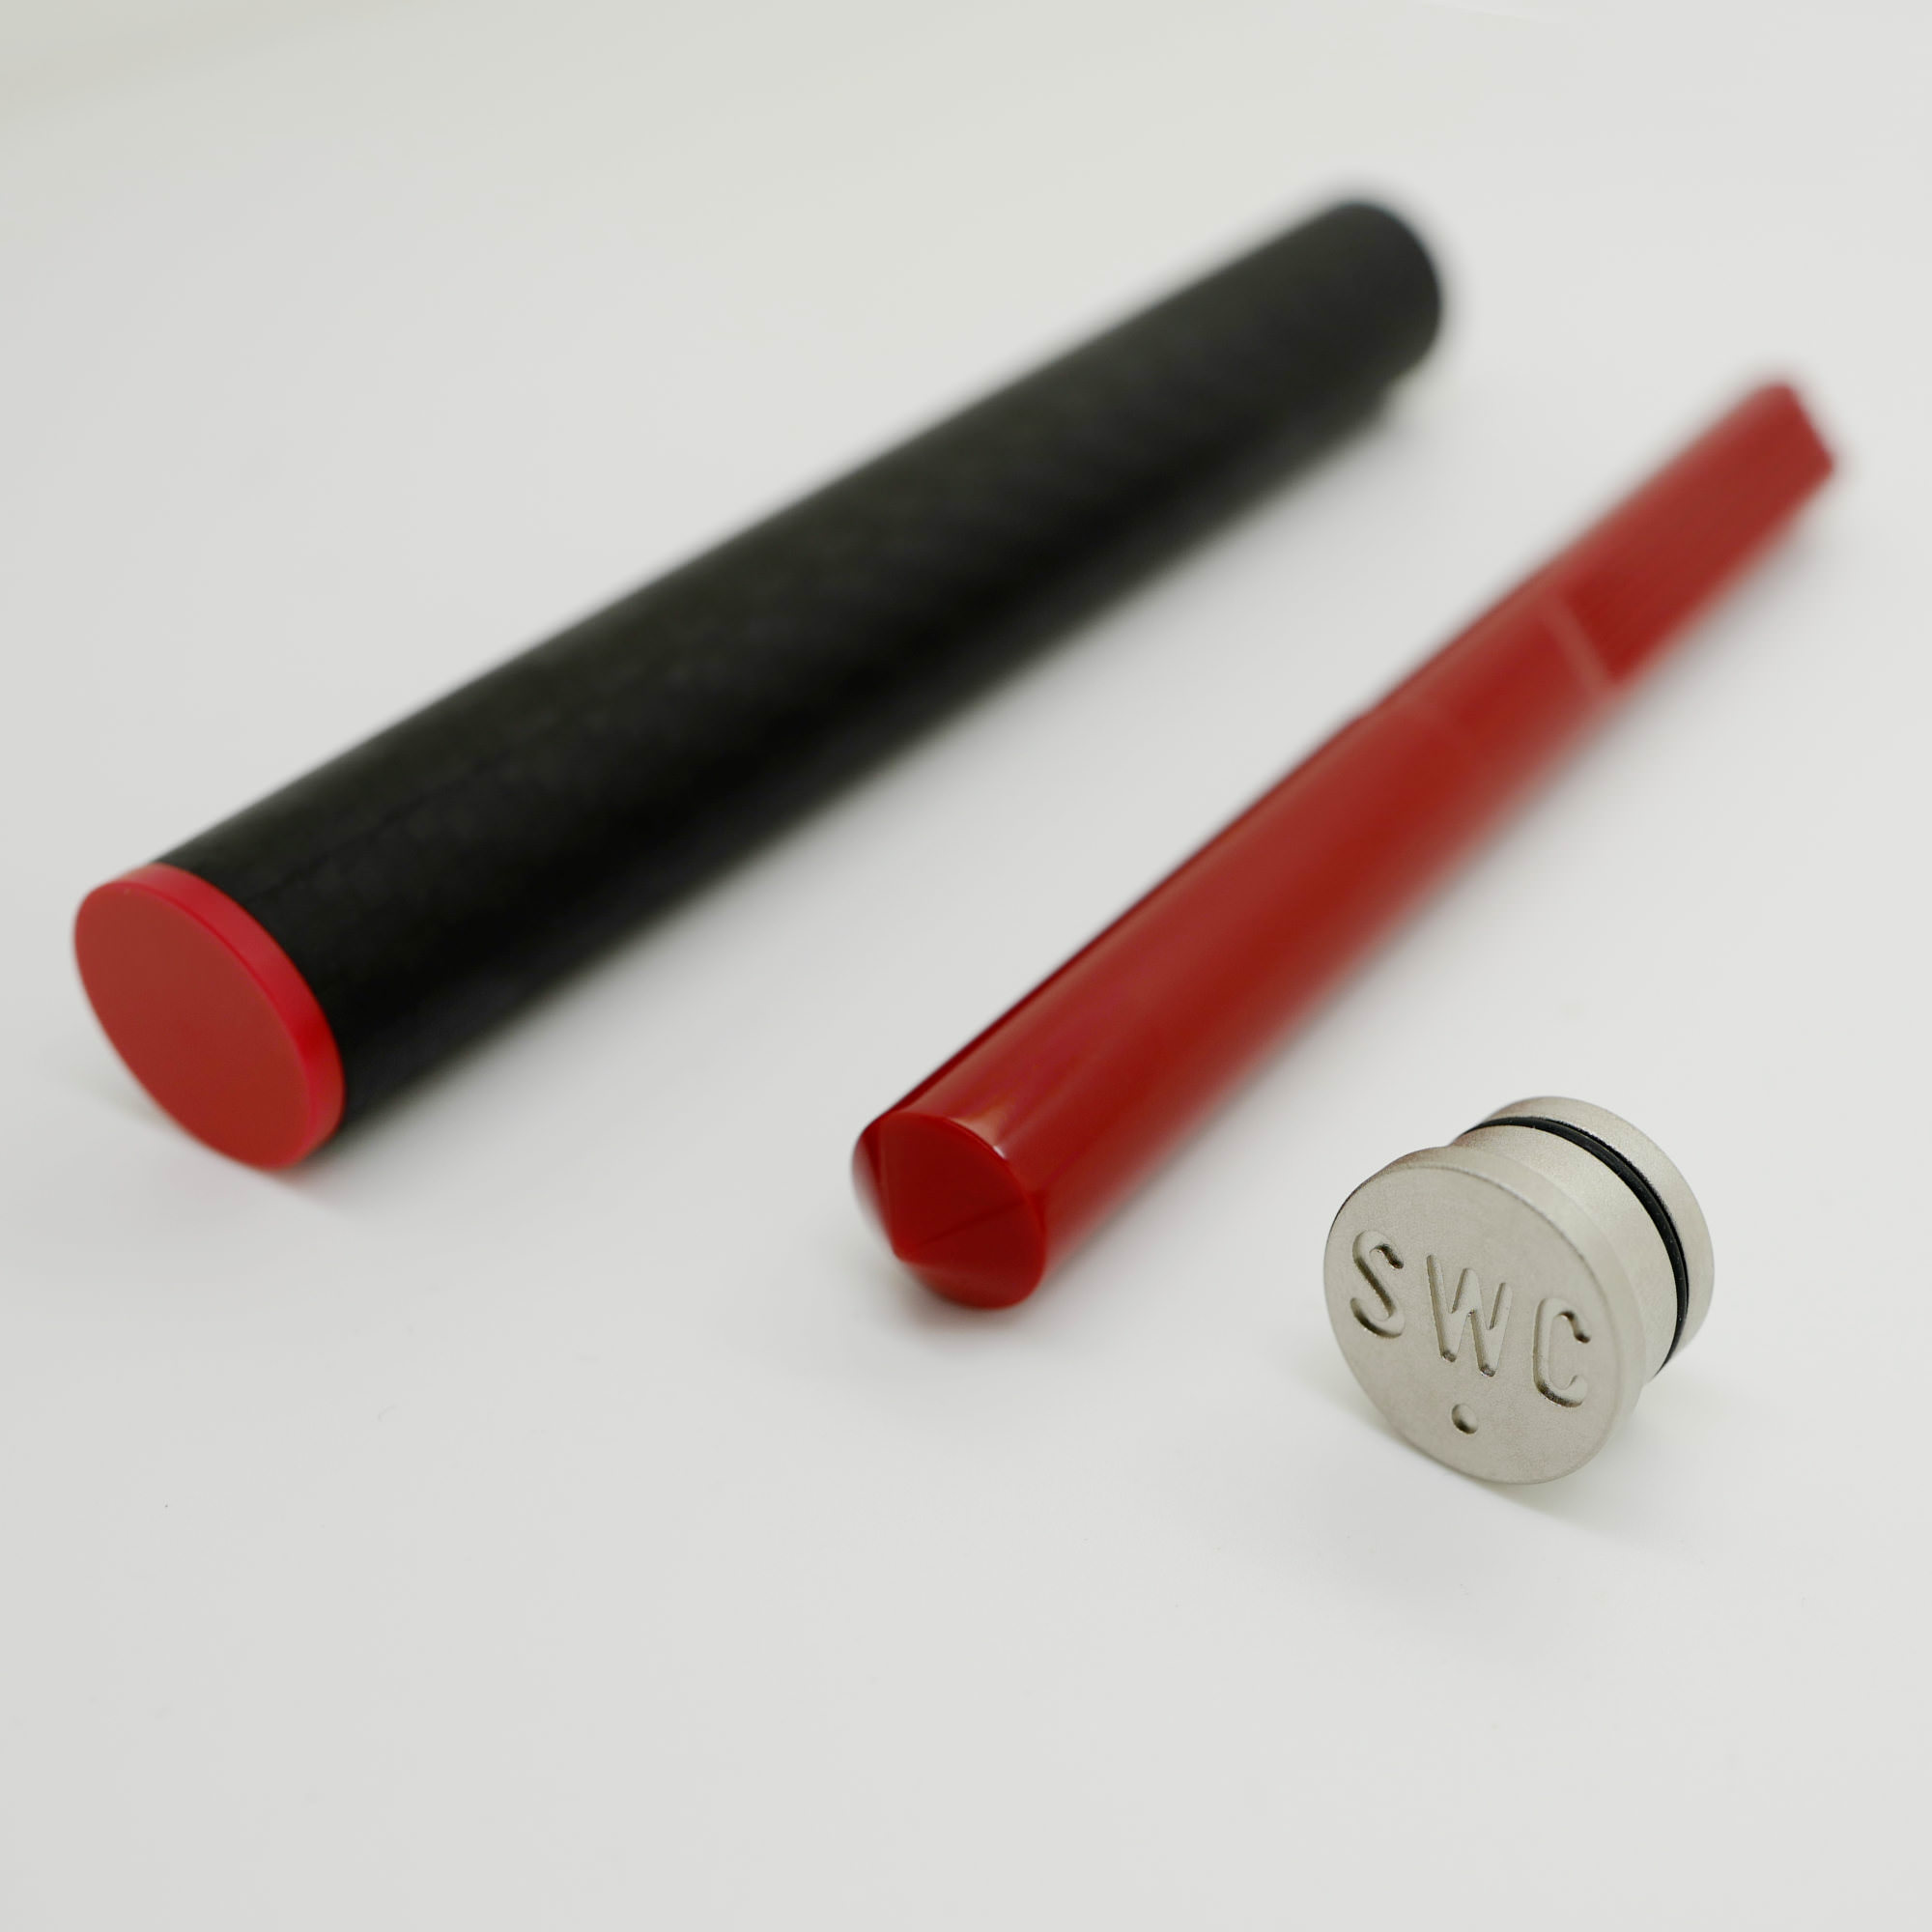 Red pen and tube